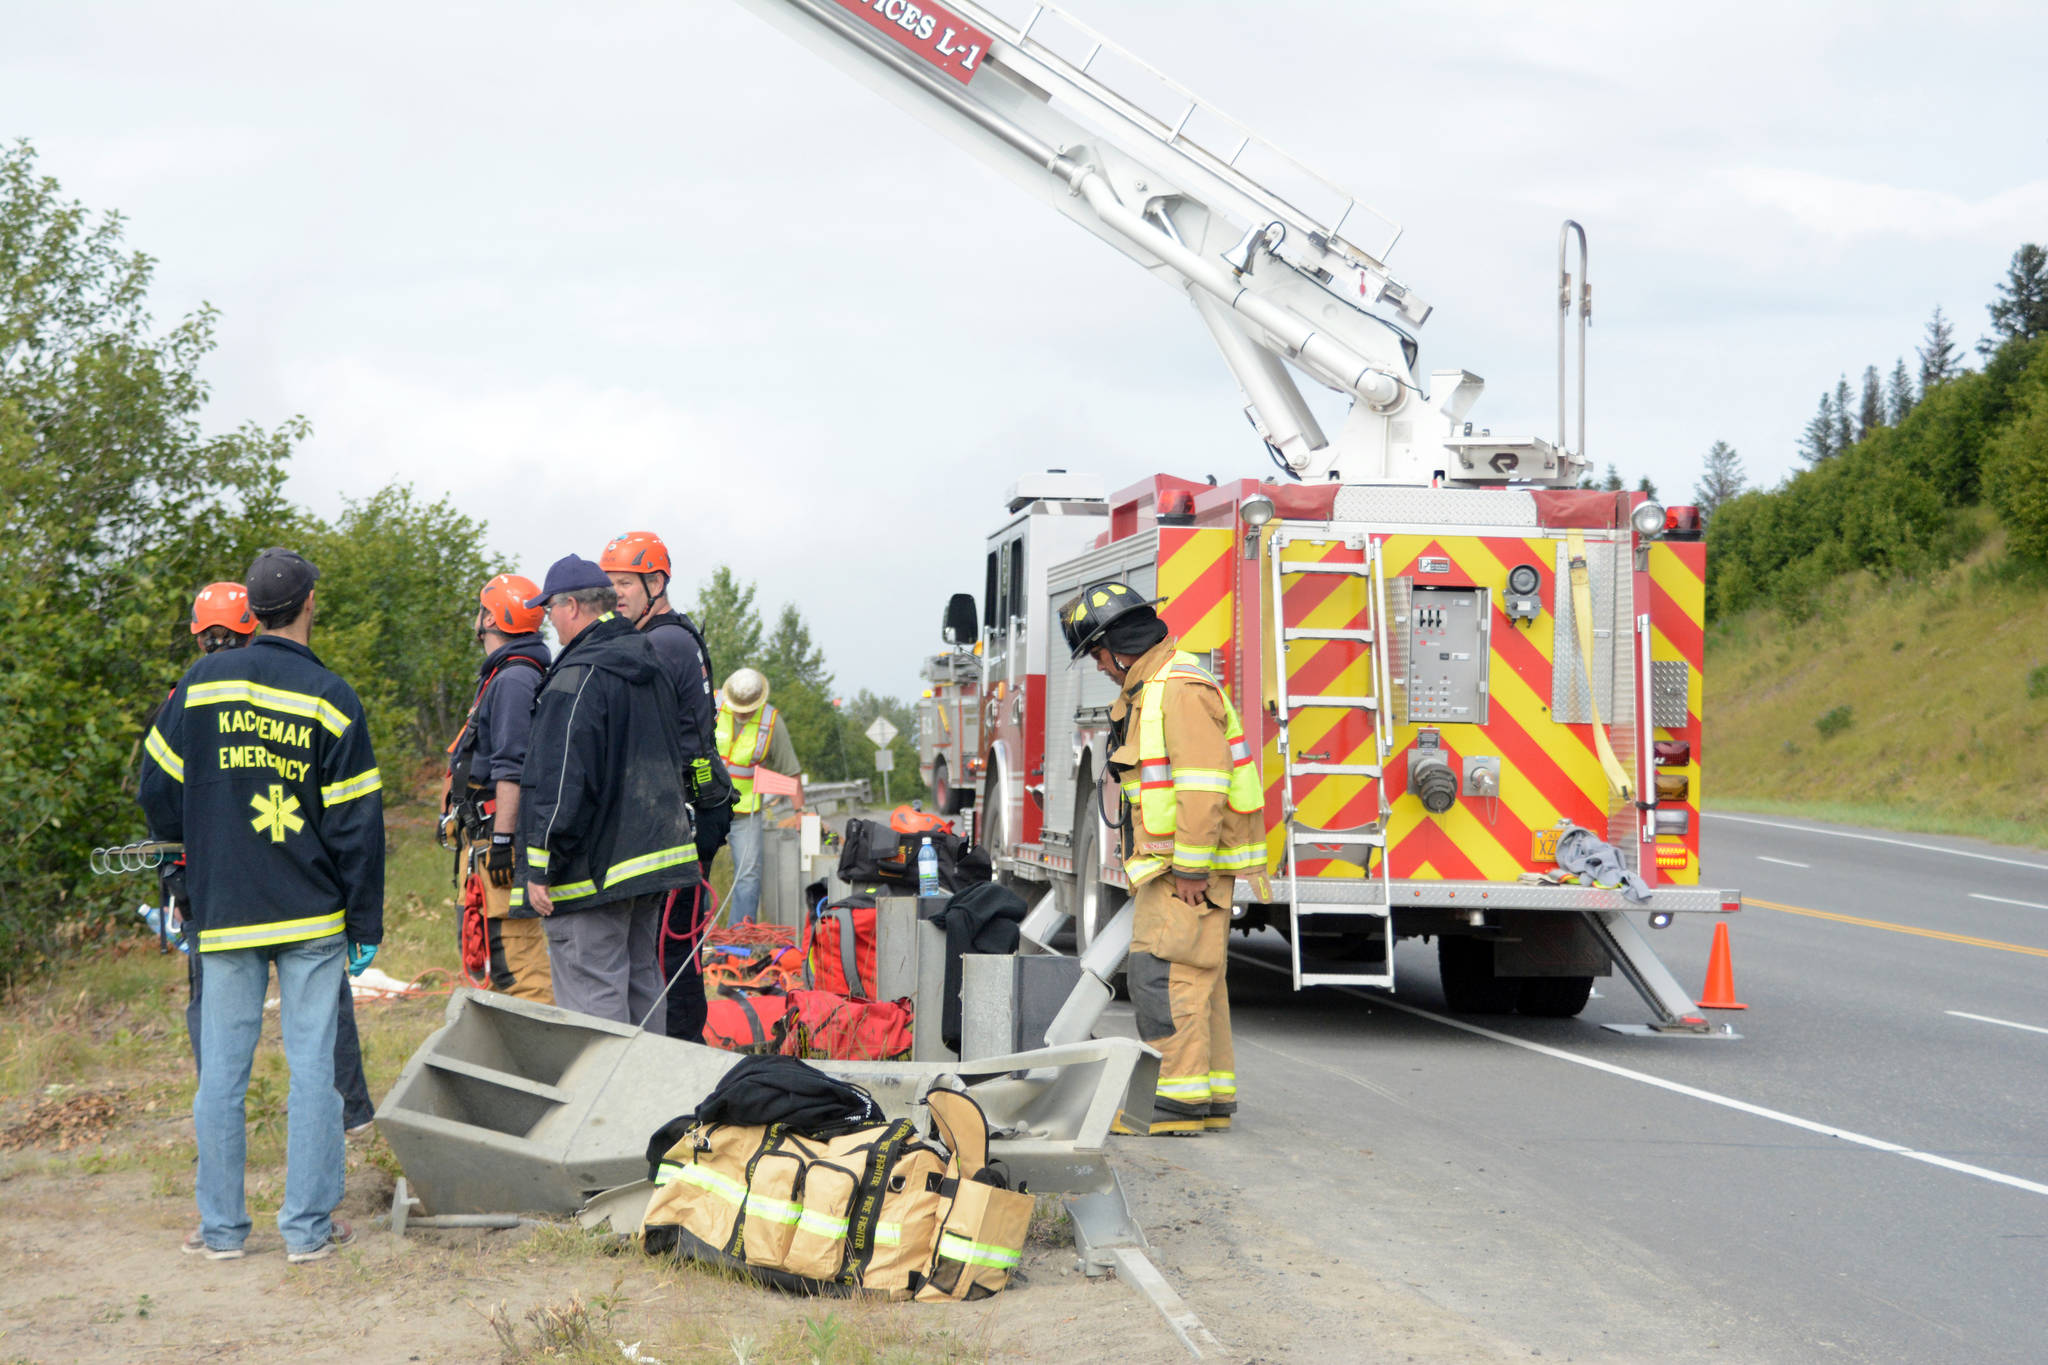 Kachemak Emergency Services and Homer Volunteer Fire Department firefighters search for possible crash victims in a ravine about noon Monday, July 24, 2017 at the Baycrest Hill turnout in Homer, Alaska. Rescuers found a truck that had plunged over the edge, but did not find any victims. The truck hit and bent the guardrail in the foreground. Friends of Thayr Watson, 32, later stopped by the scene to tell them Watson had crashed the truck earlier and was OK. Photo by Michael Armstrong/Homer News